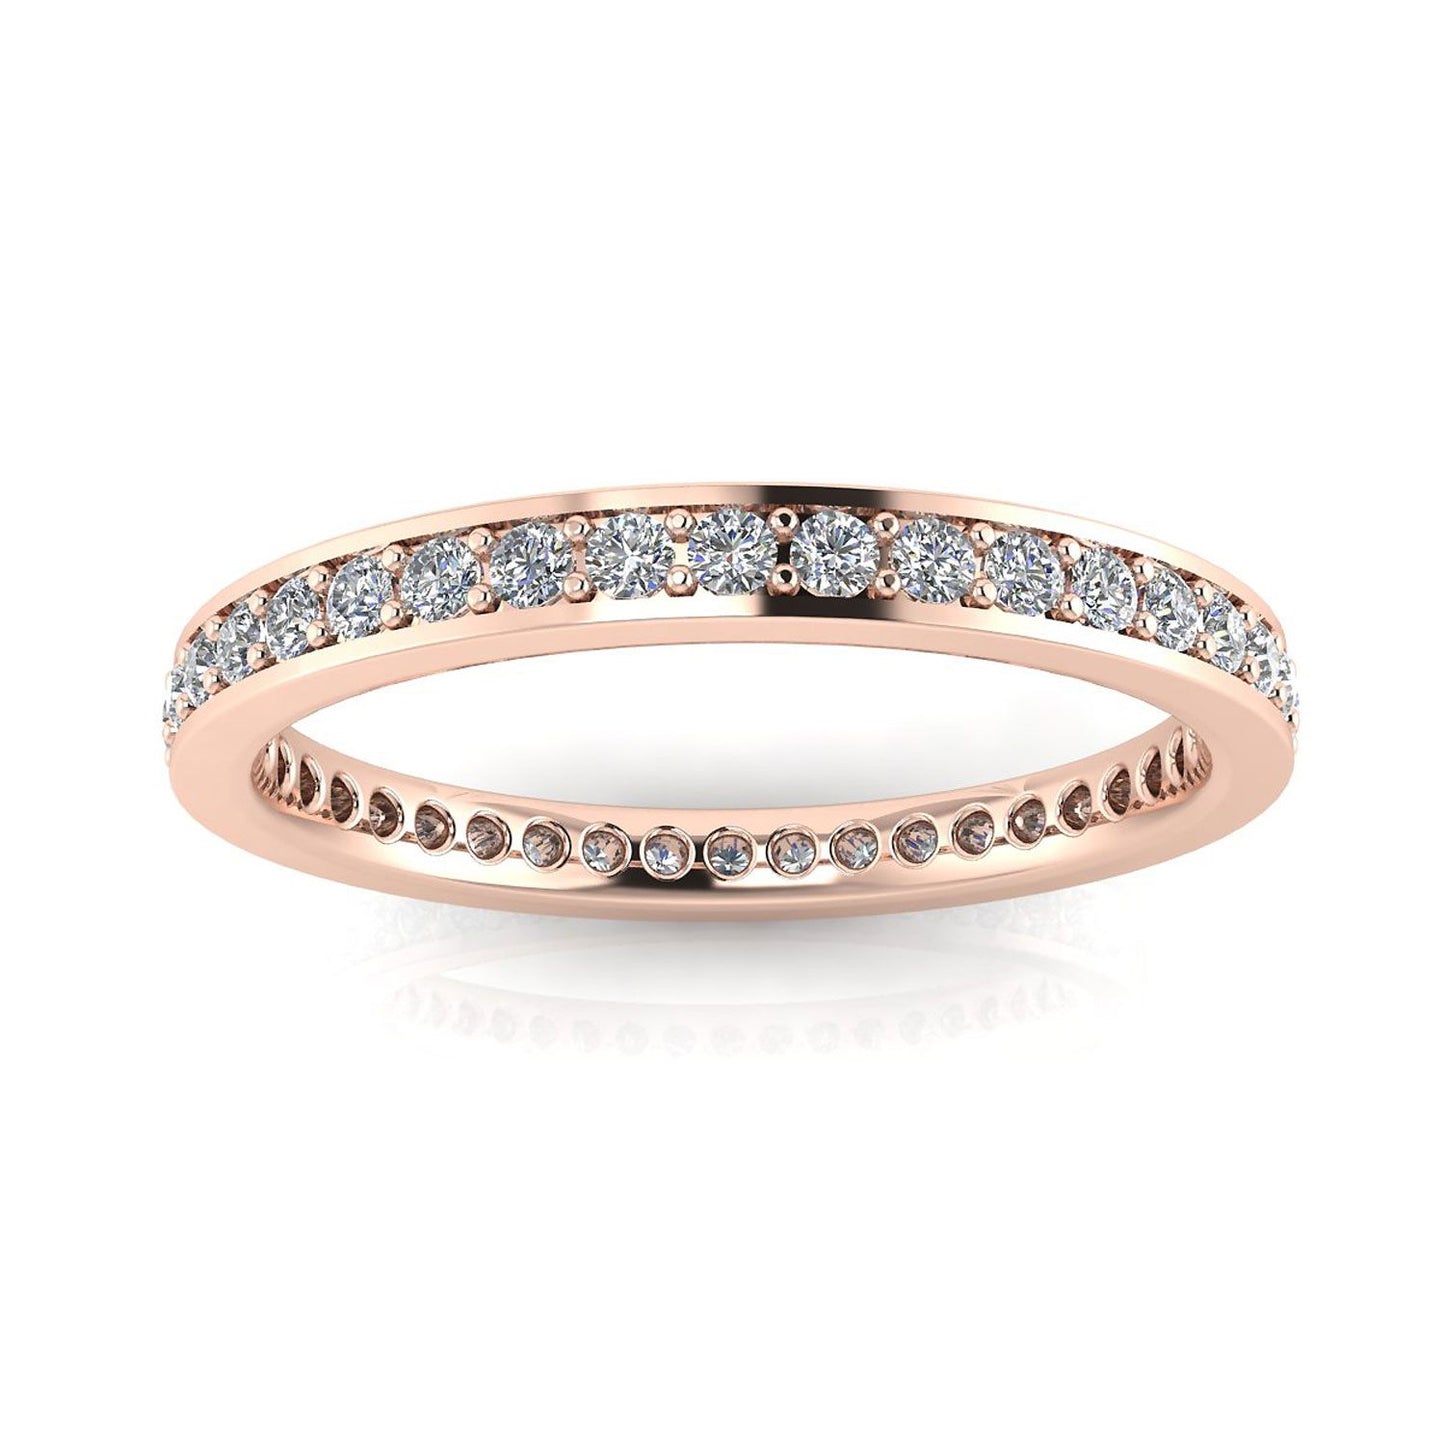 Round Brilliant Cut Diamond Channel Pave Set Eternity Ring In 14k Rose Gold  (0.5ct. Tw.) Ring Size 7.5